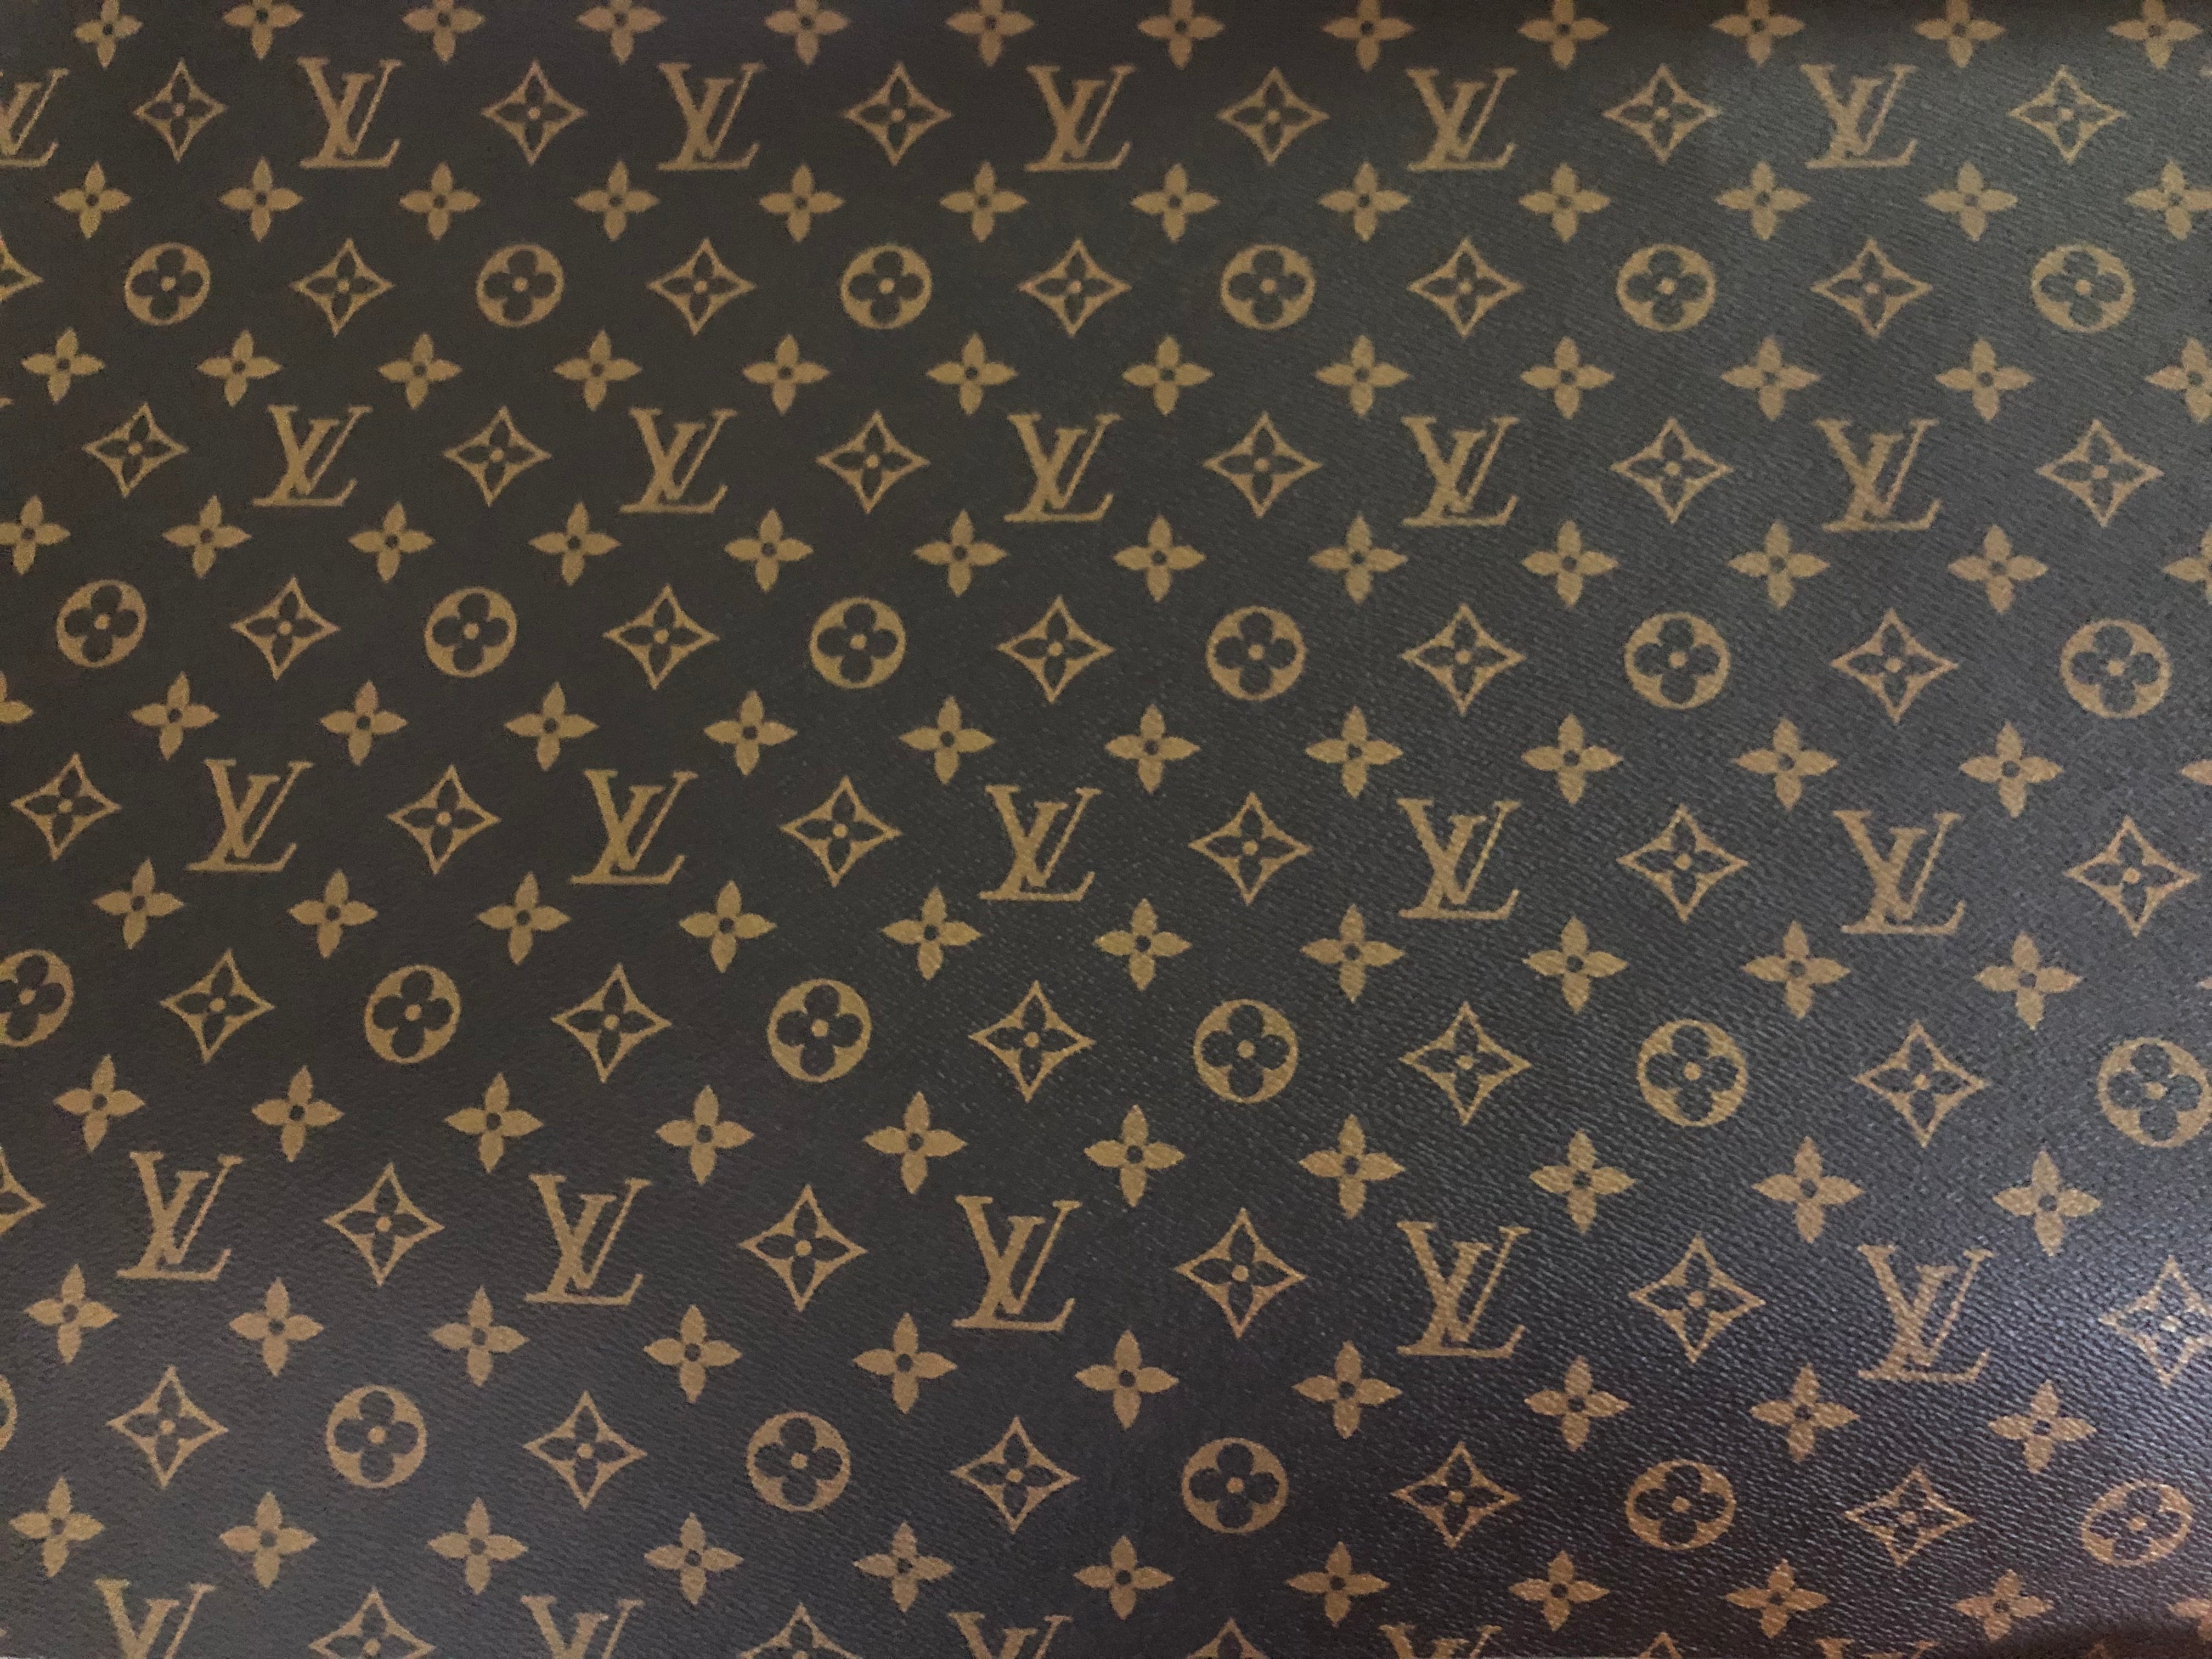 vuitton vinyl fabric upholstery louis vuitton fabric by the yard